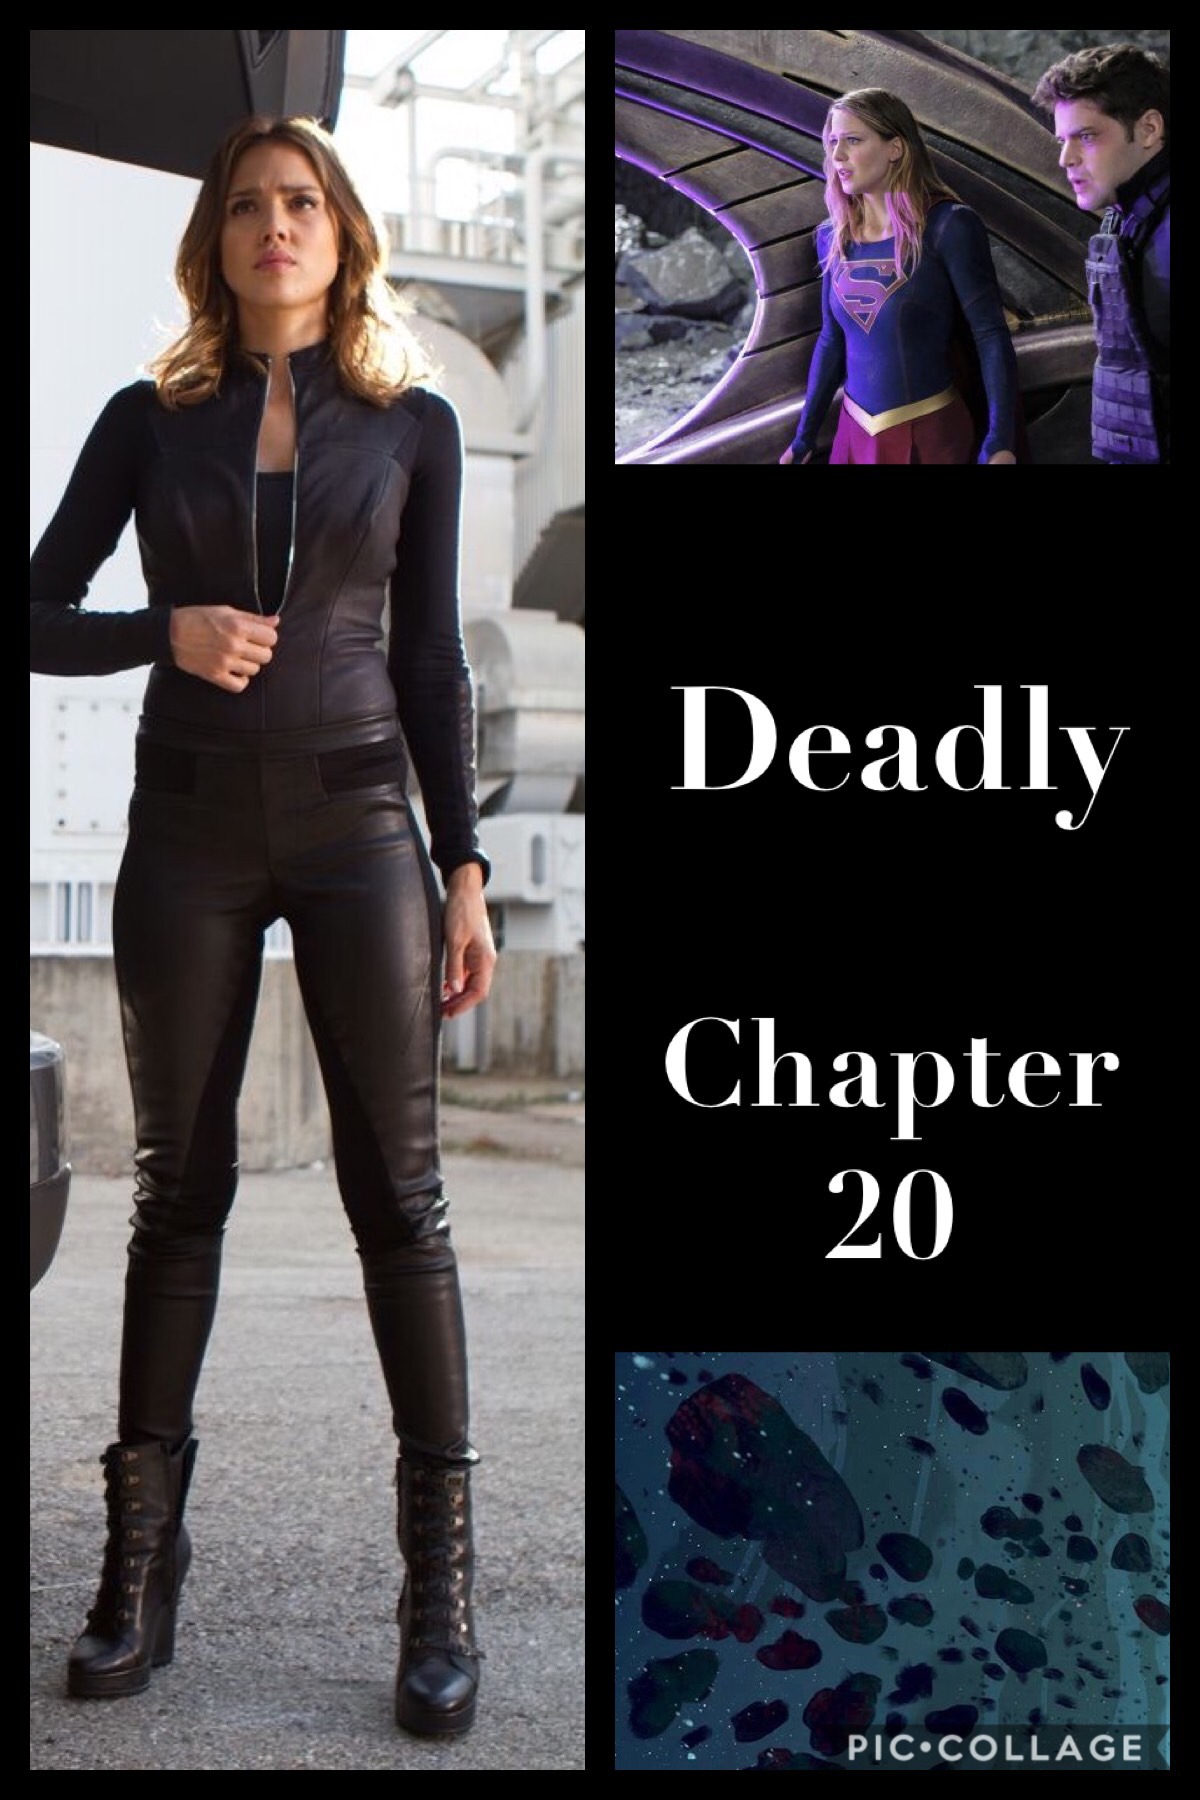 Deadly chapter 20